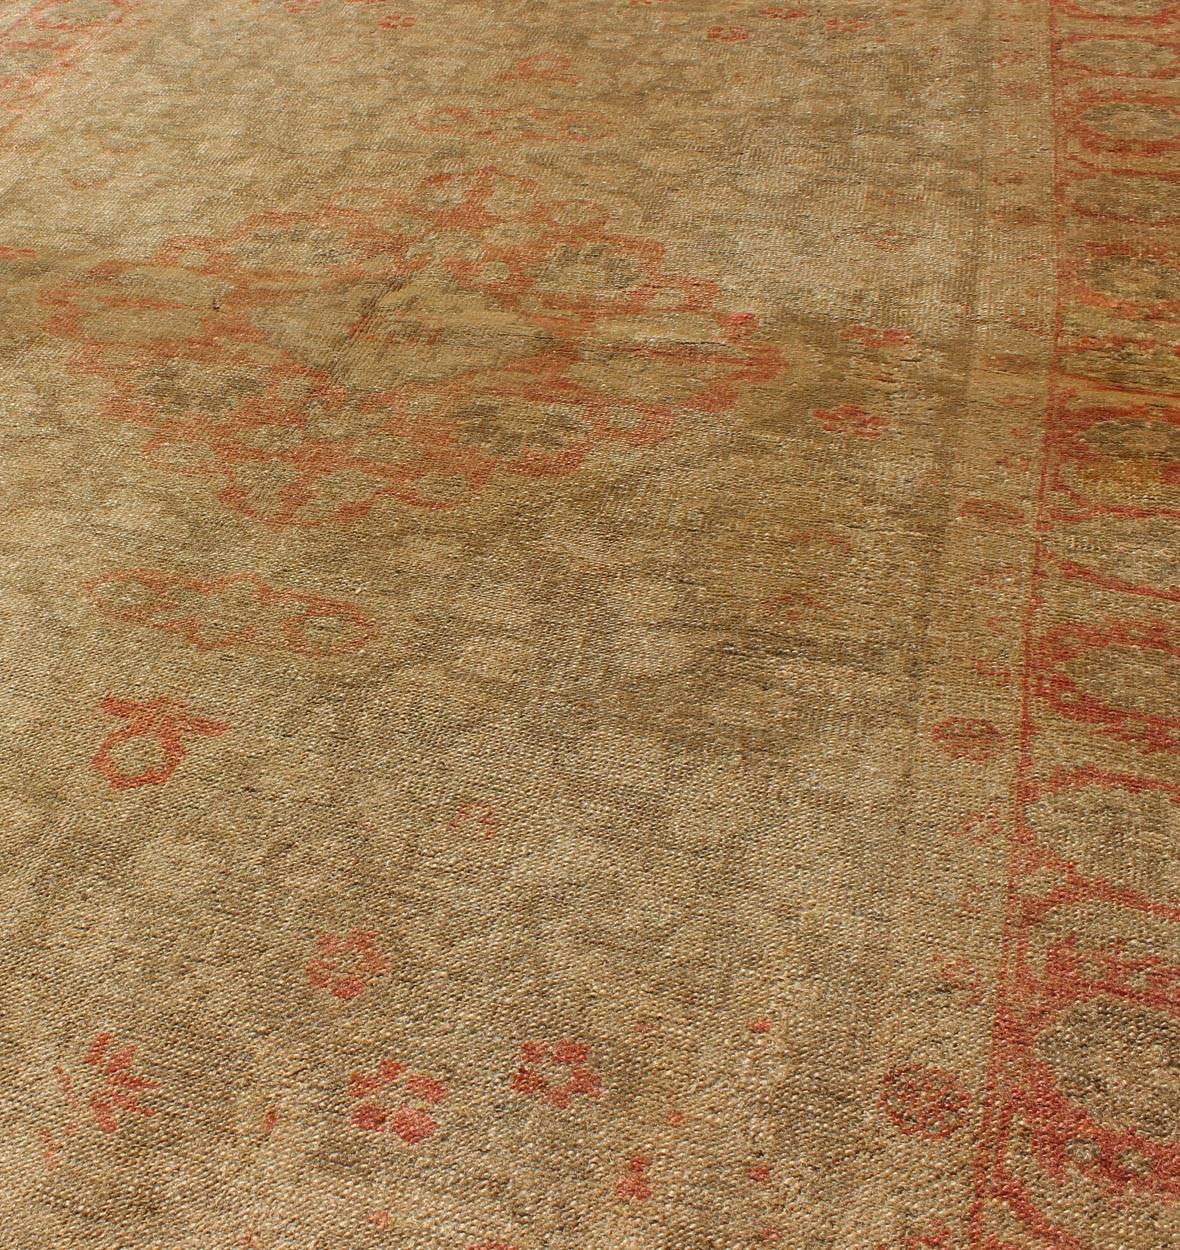 Hand-Knotted Muted Fine-Weave Sivas Rug with Botanical and Floral Elements in Red & Tan For Sale